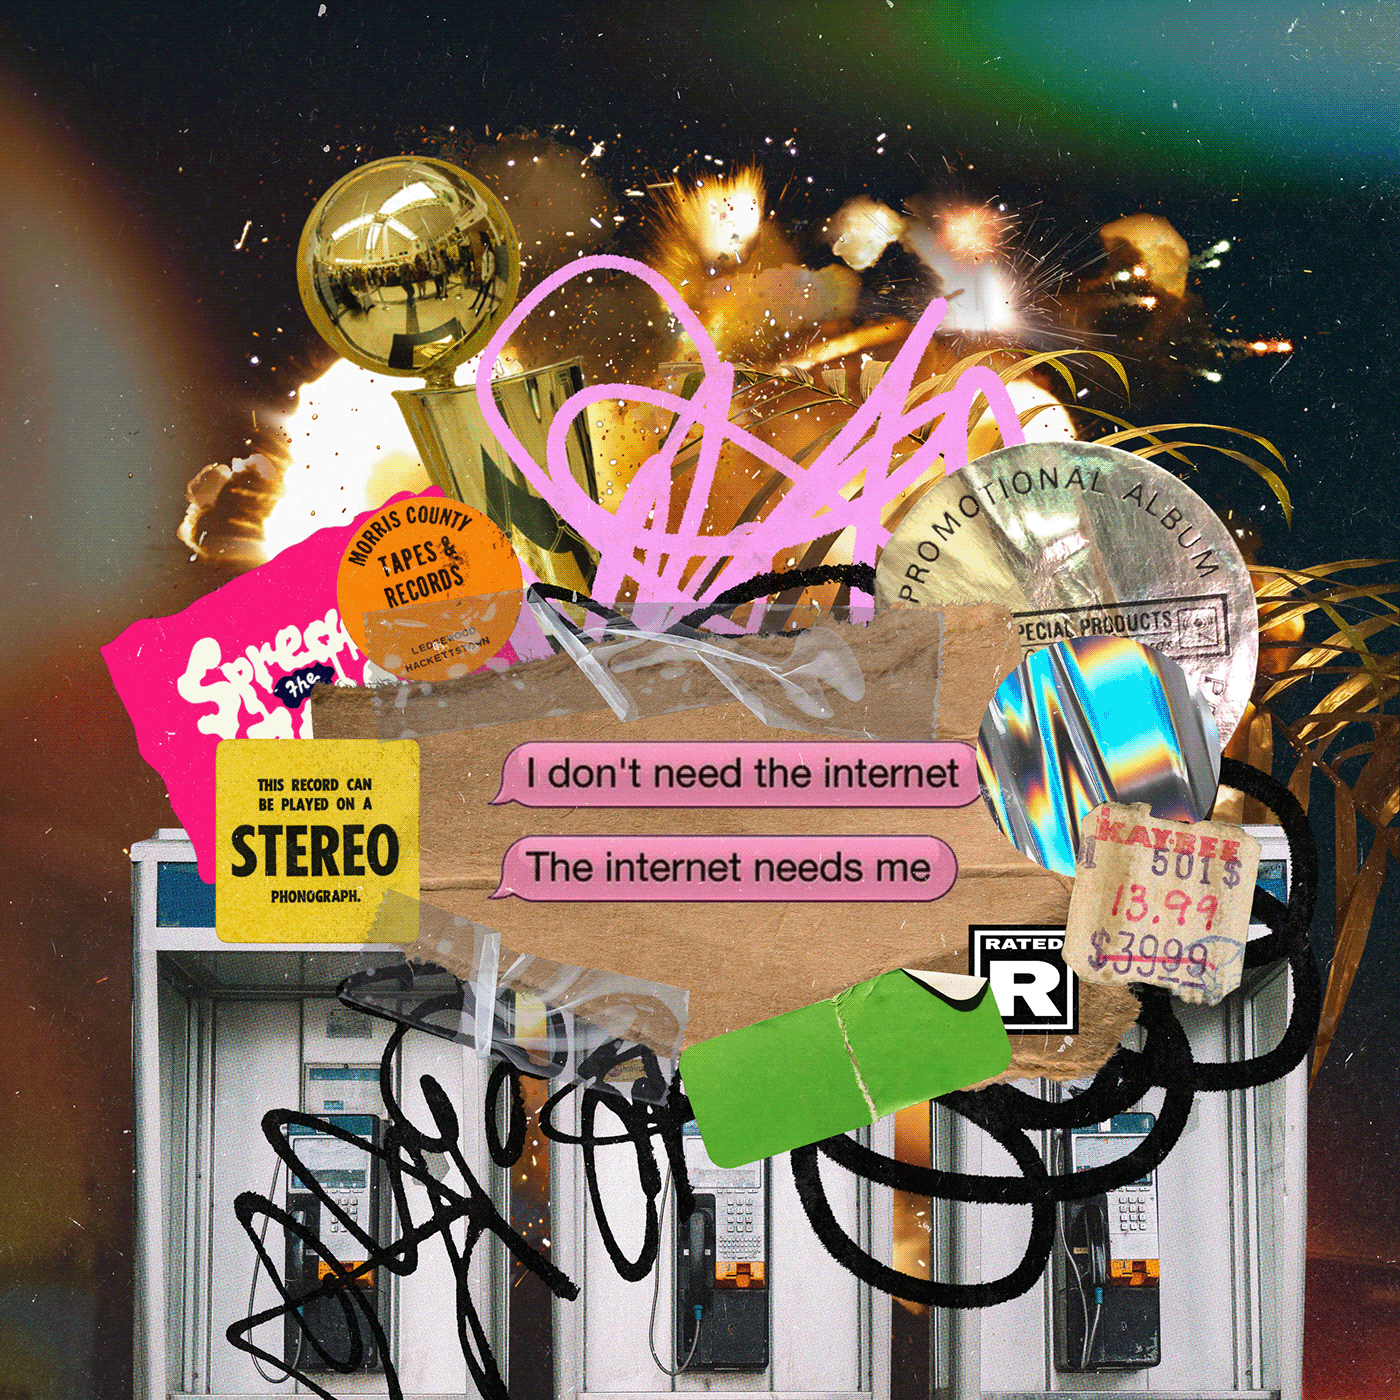 Avante Garde collage collage art daily experimental free ipad pro